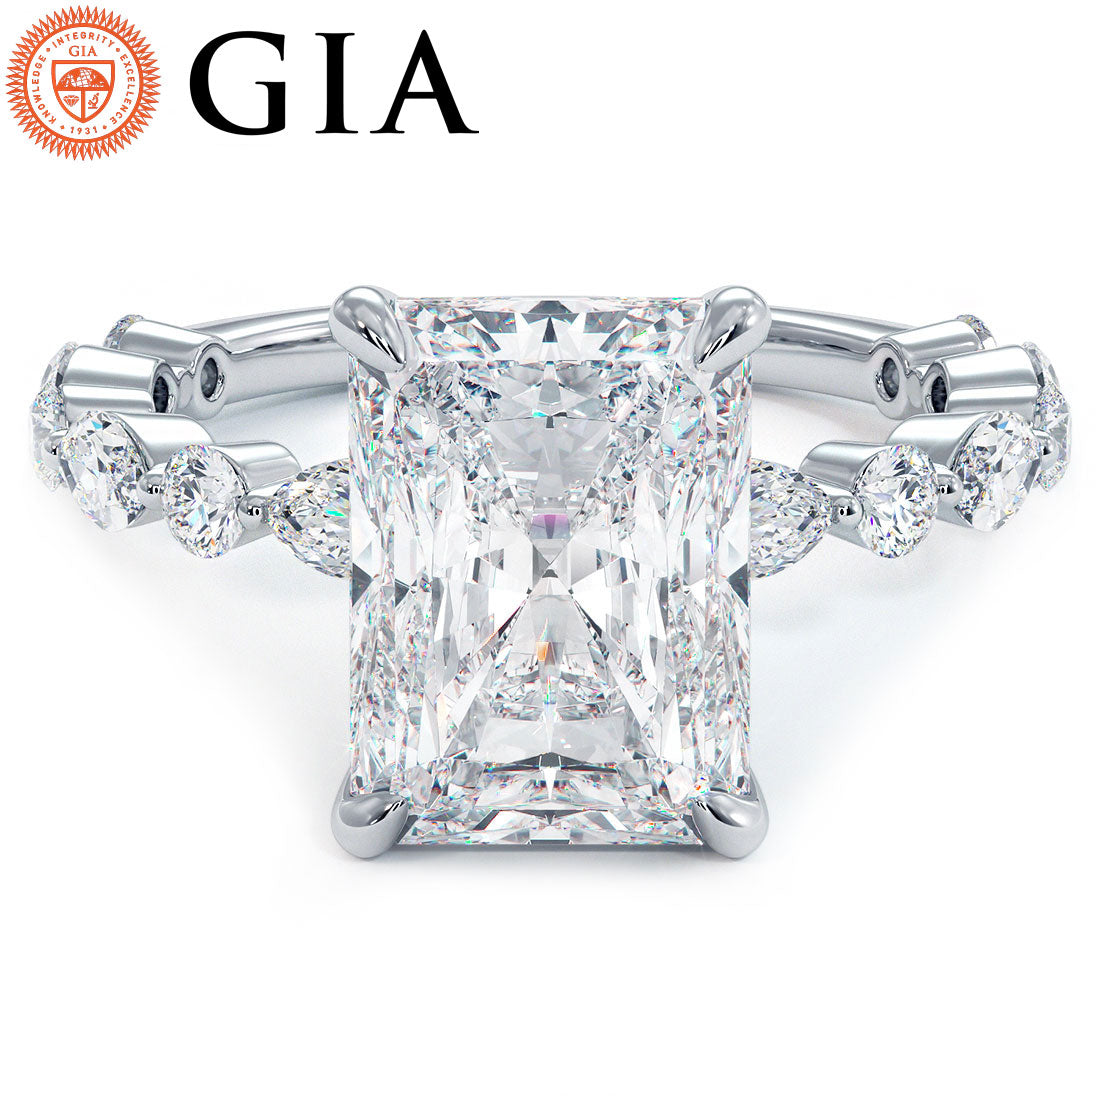 4.25ctw GIA Certified E-VS1 Radiant Cut Alternating Round & Marquise Lab Grown Diamond Engagement Ring set in 18k White Gold